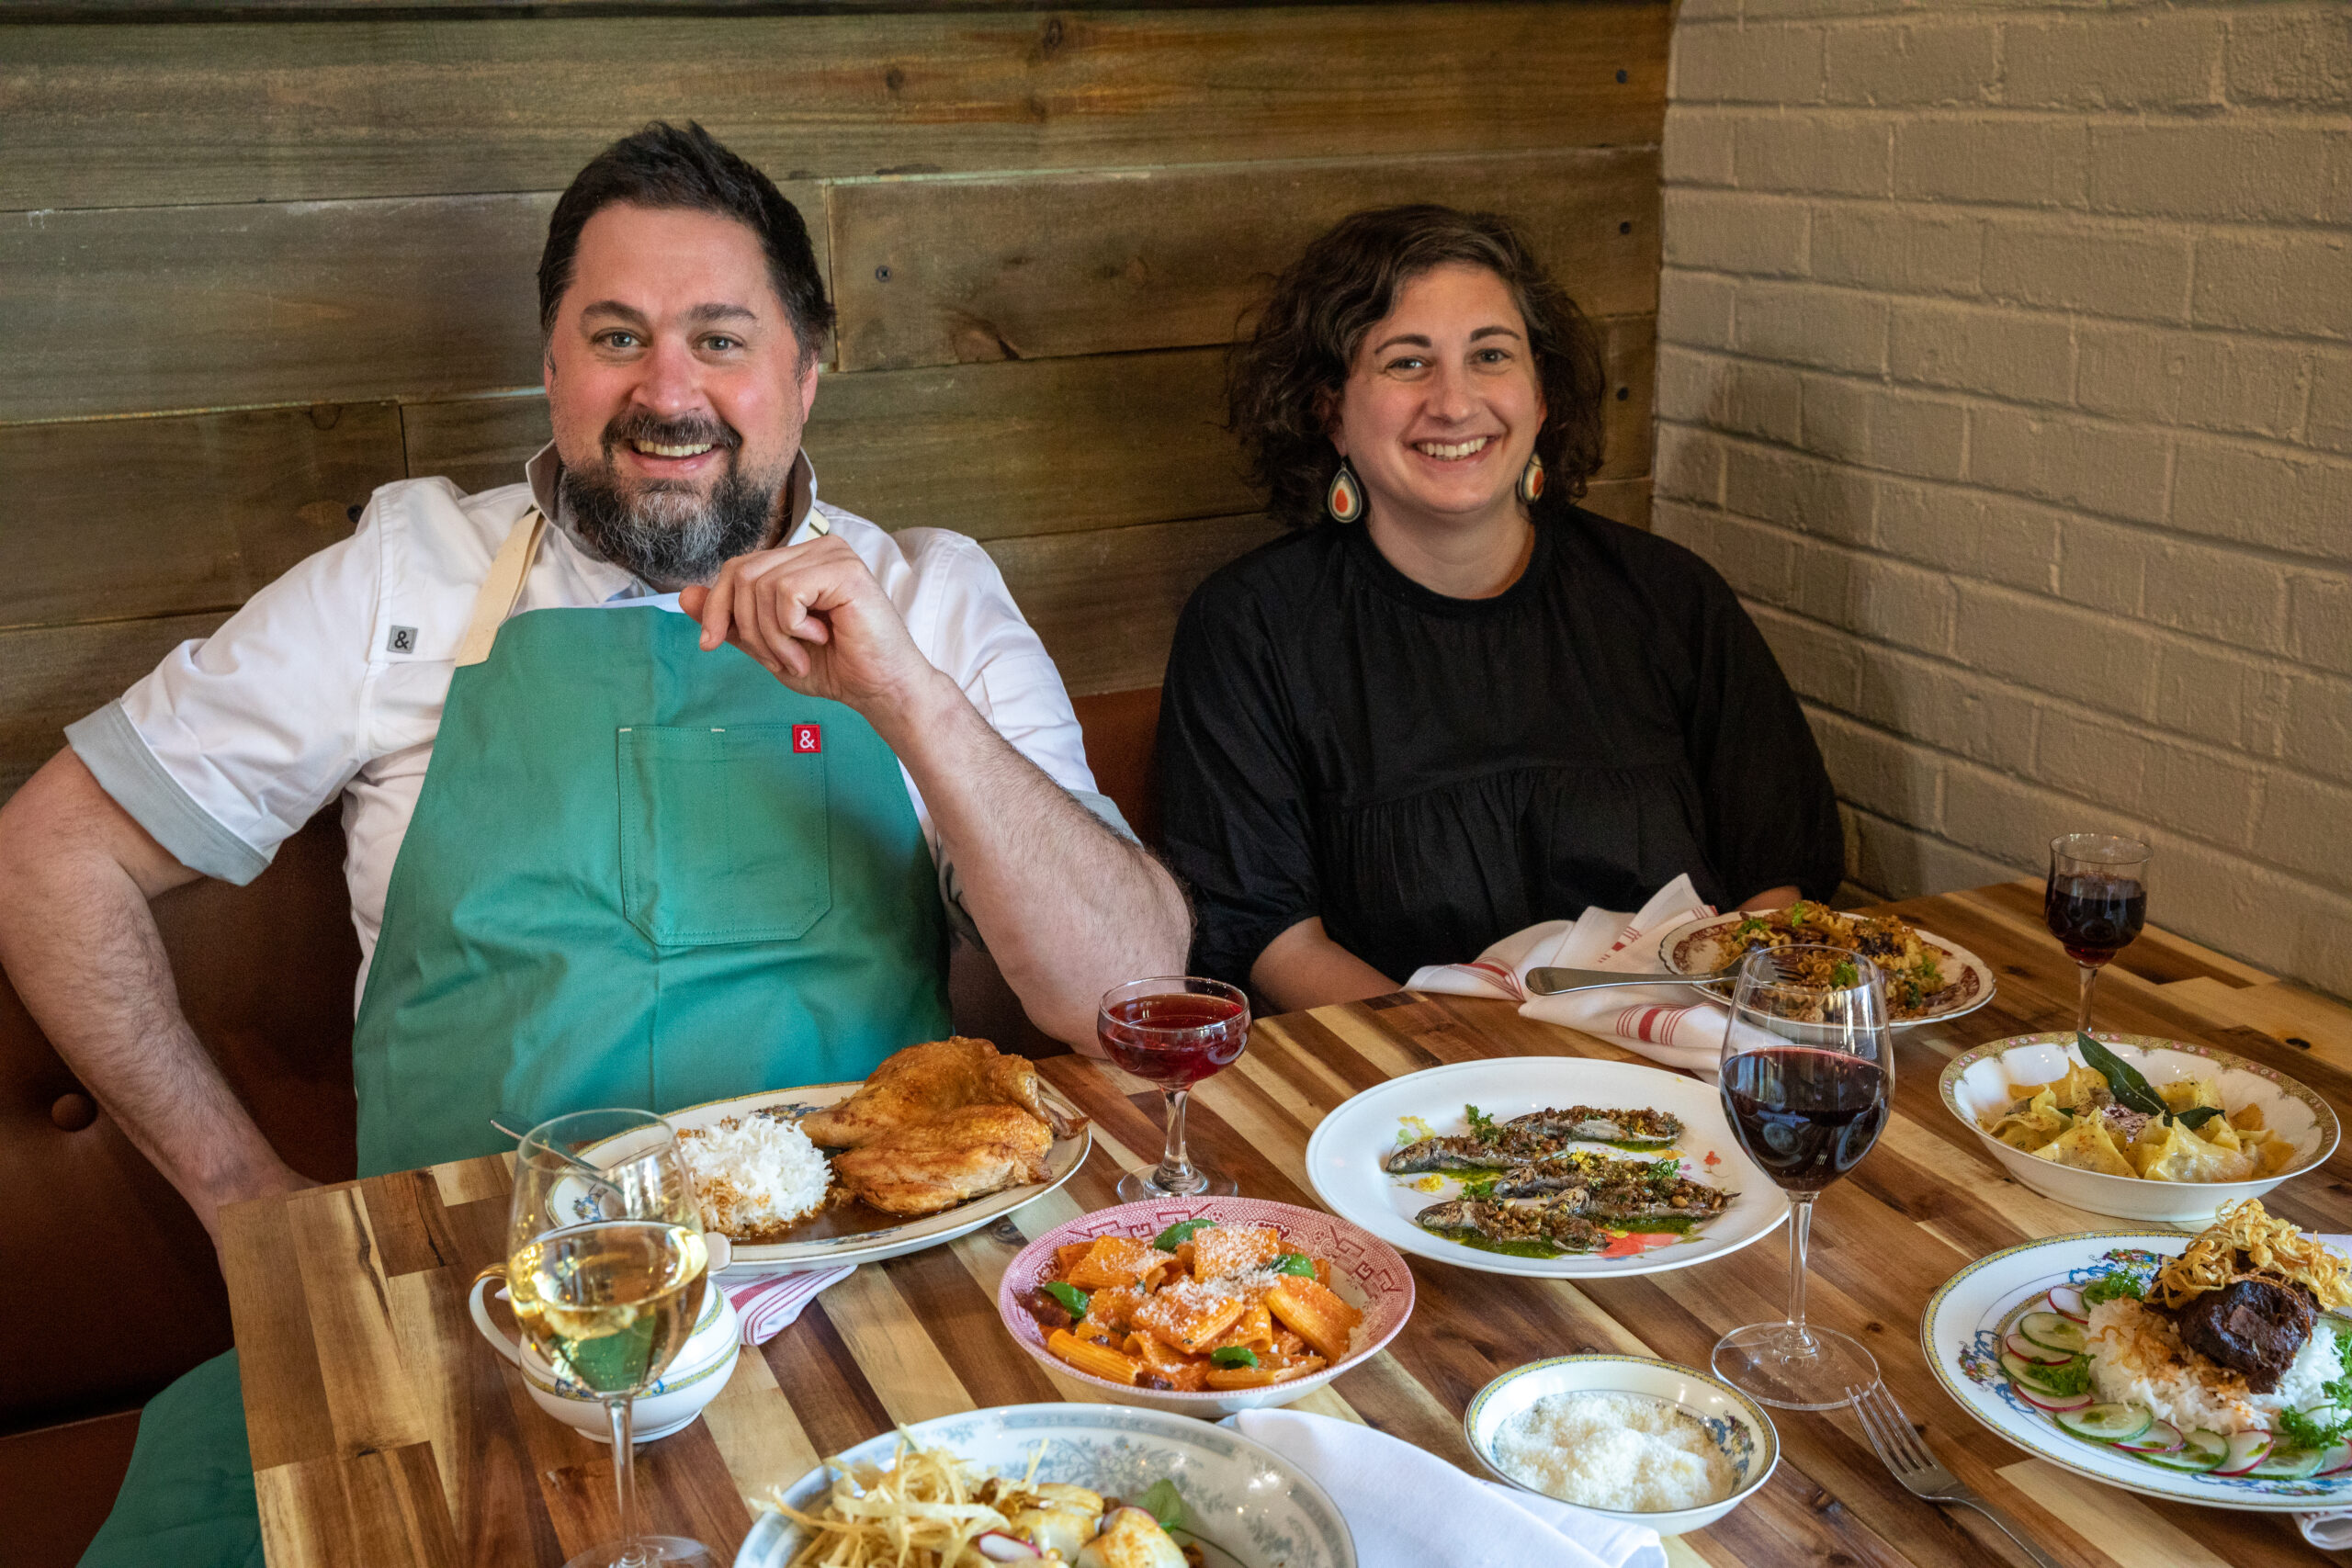 Chapel Hill’s Bombolo is North Carolina’s ‘Restaurant of the Year’